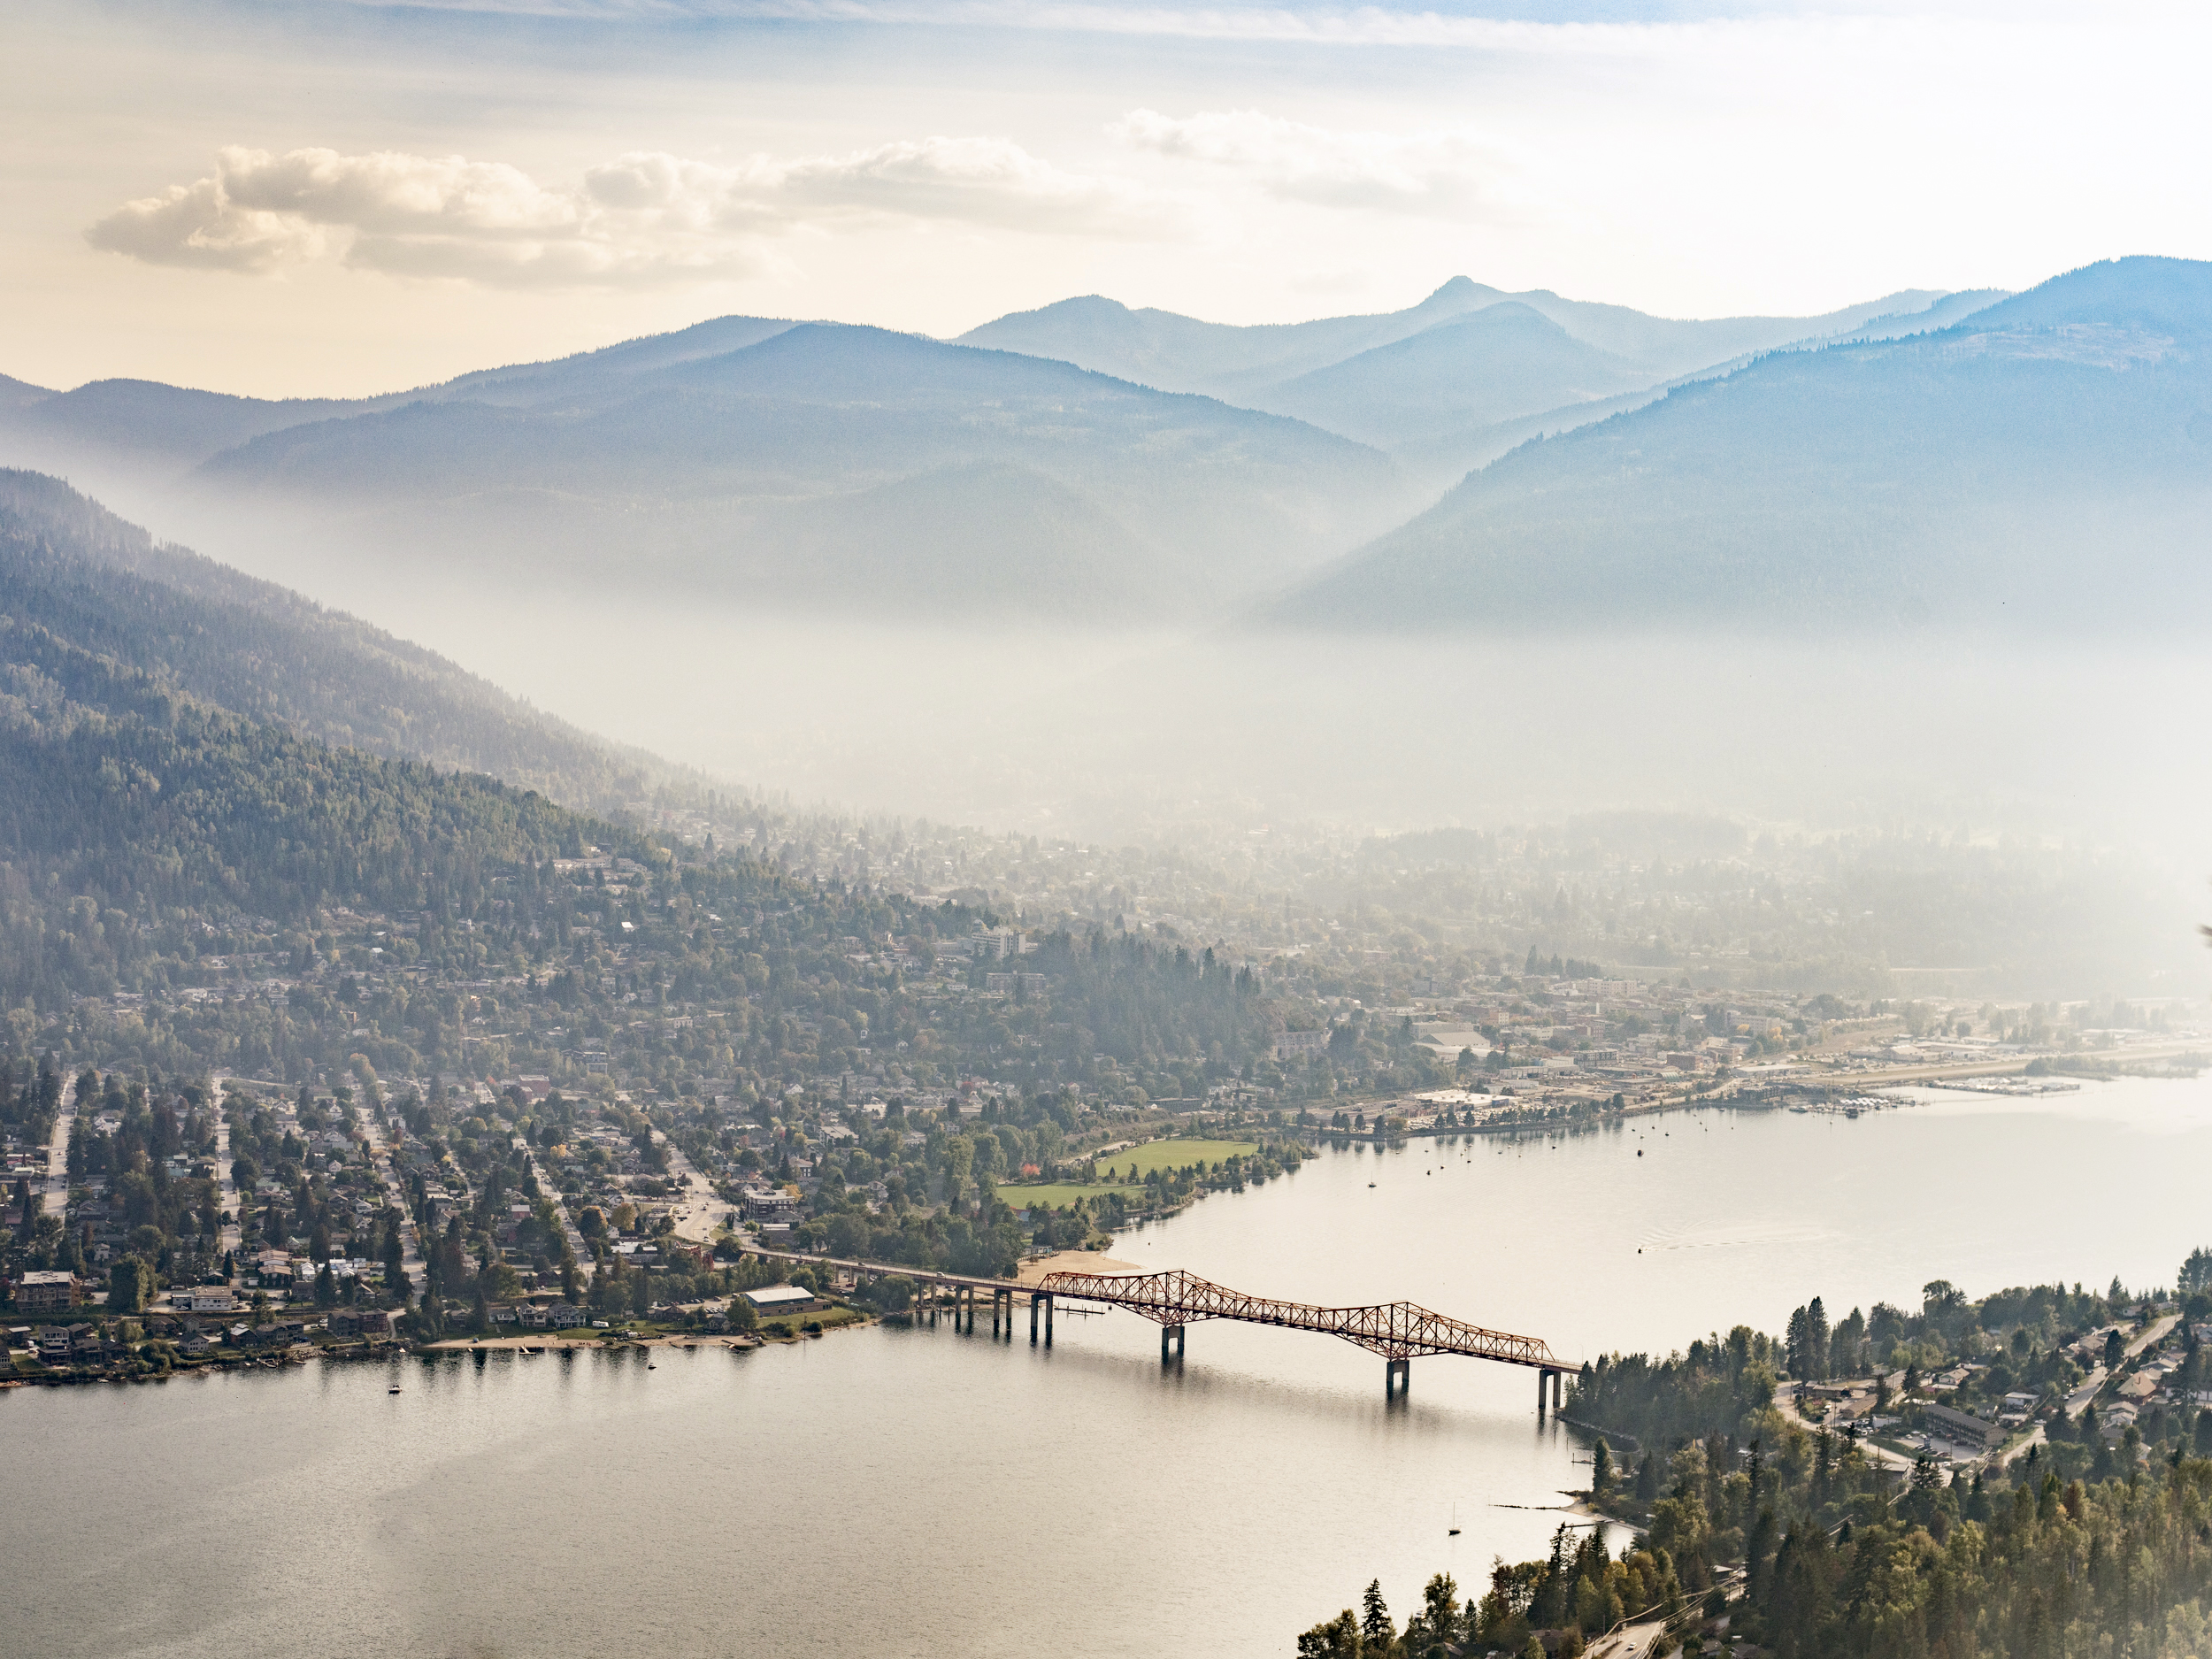 A view of Nelson, B.C. from the one-mile trail lookout. Photo: Kari Medig / The Narwhal